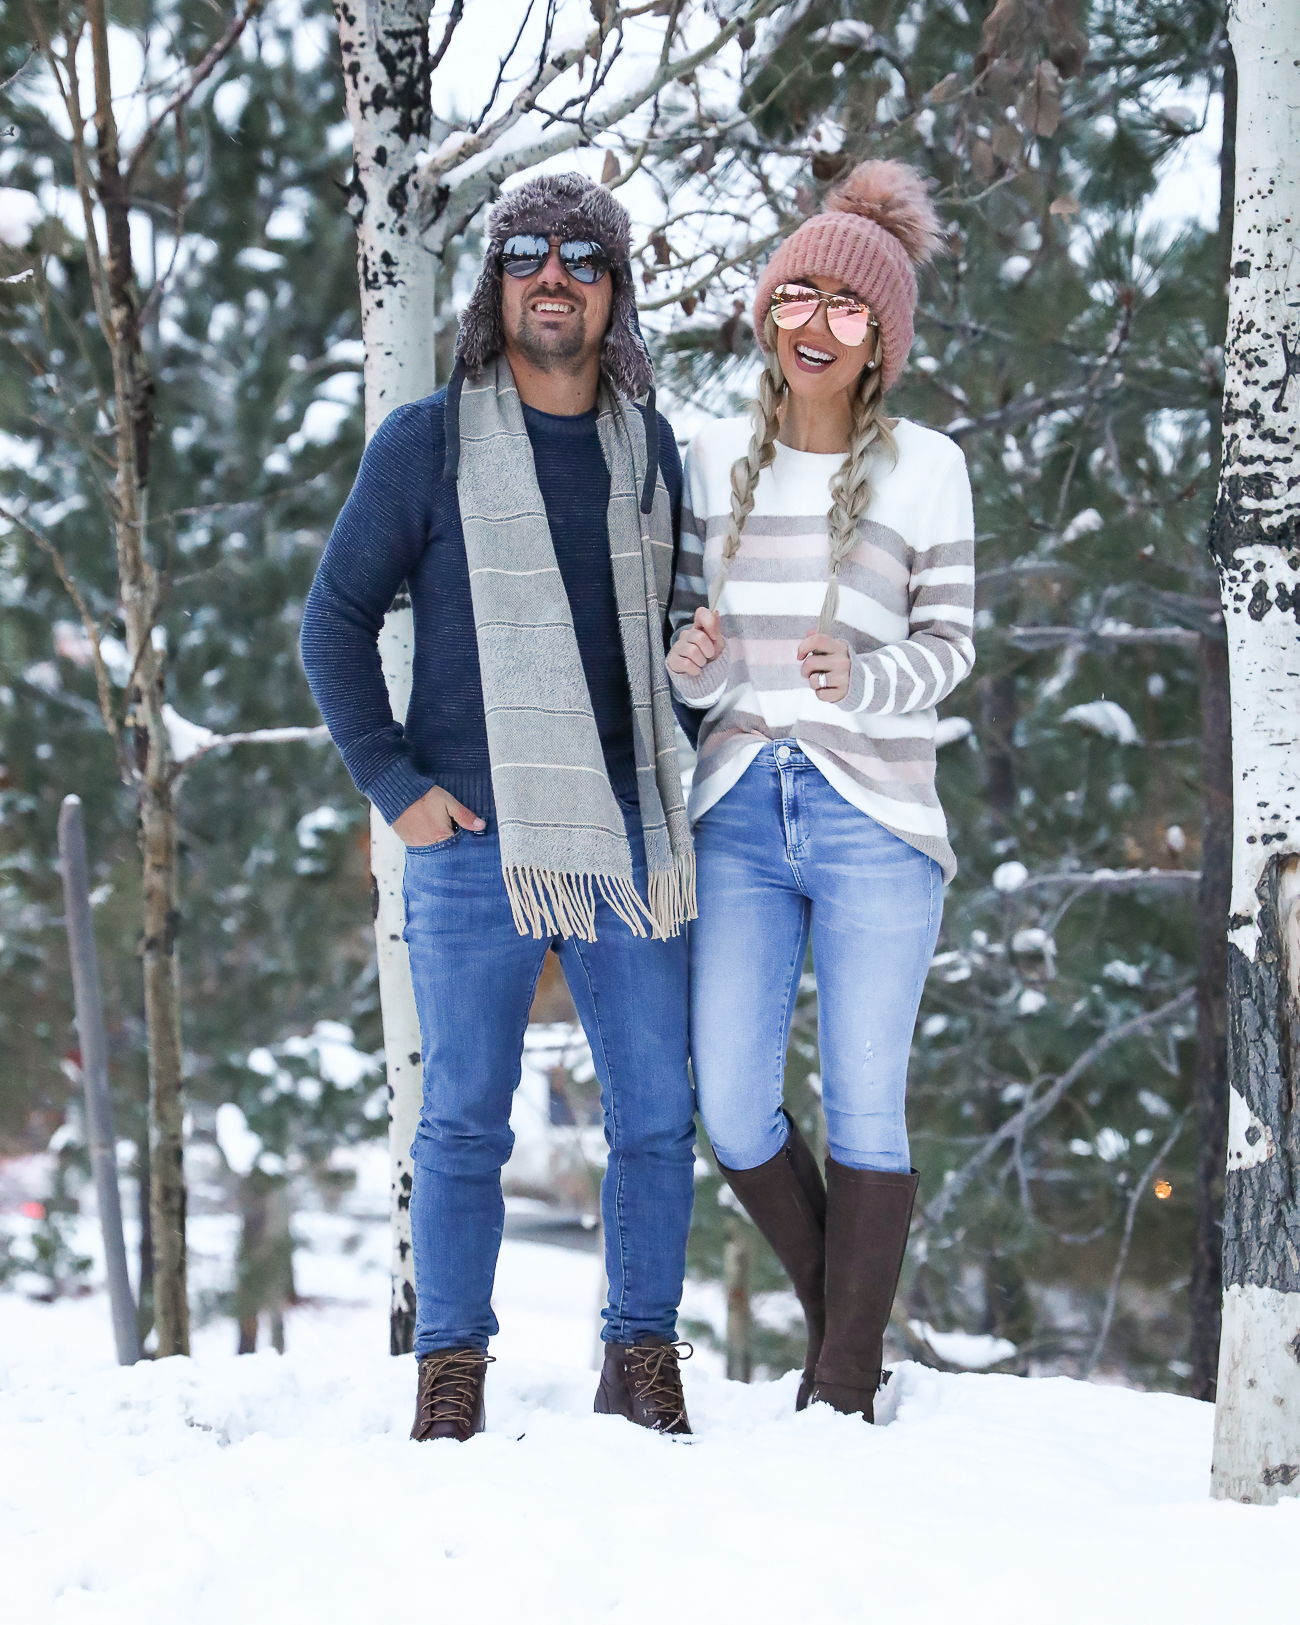 Zappos Rockport Christy Boots His & hers Couple winter outfit ideas Lake Tahoe NorthStar Resort Laura Beverlin -4